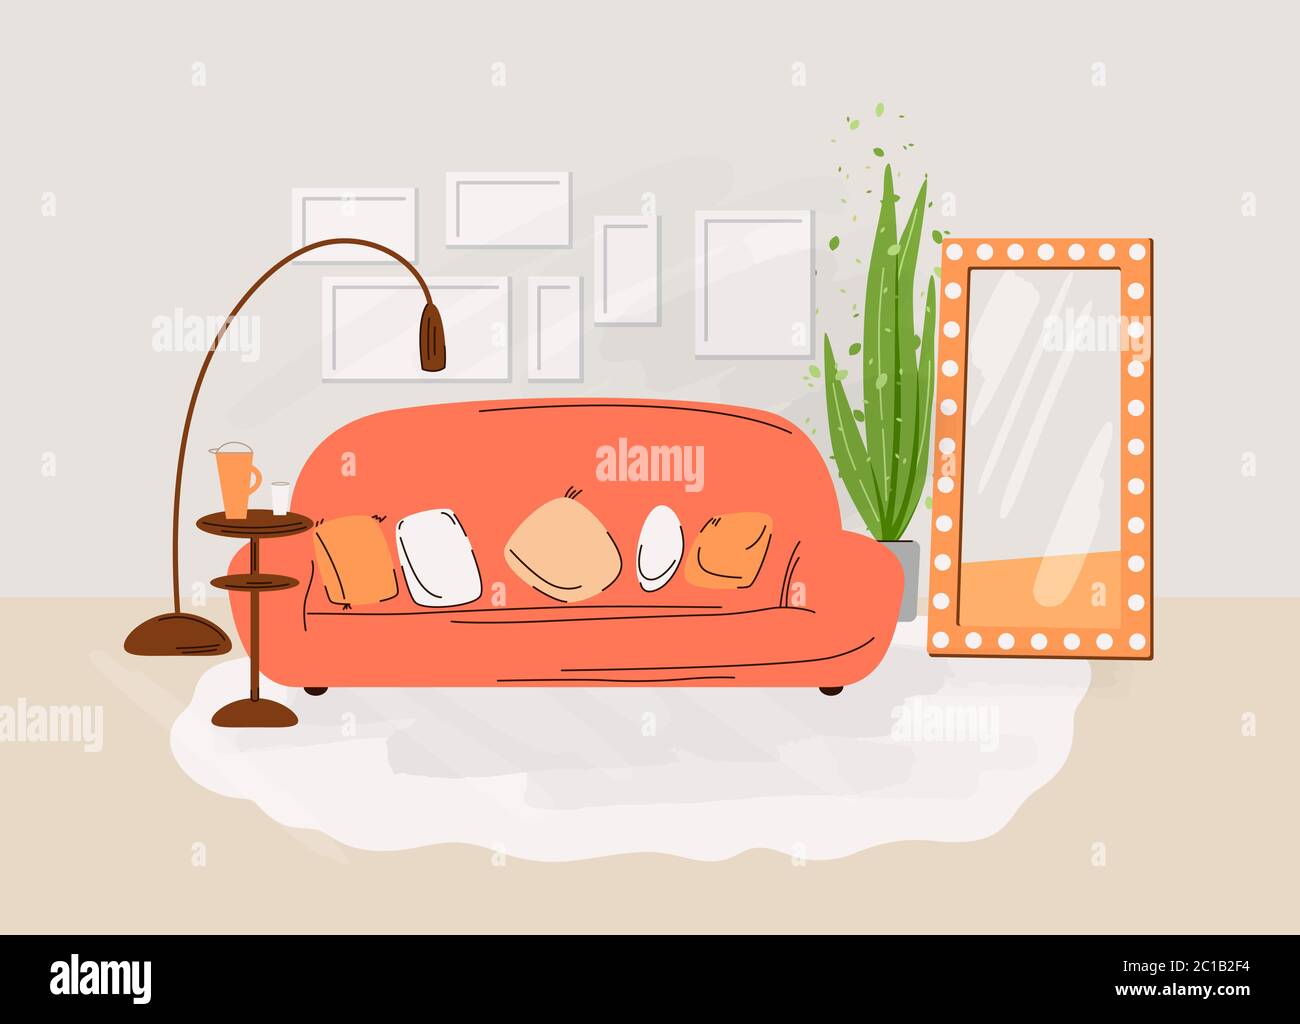 Interior of the living room. Vector flat illustration with Design of a cozy room with sofa, table, shelfs with books, plants and decor accessories Stock Vector